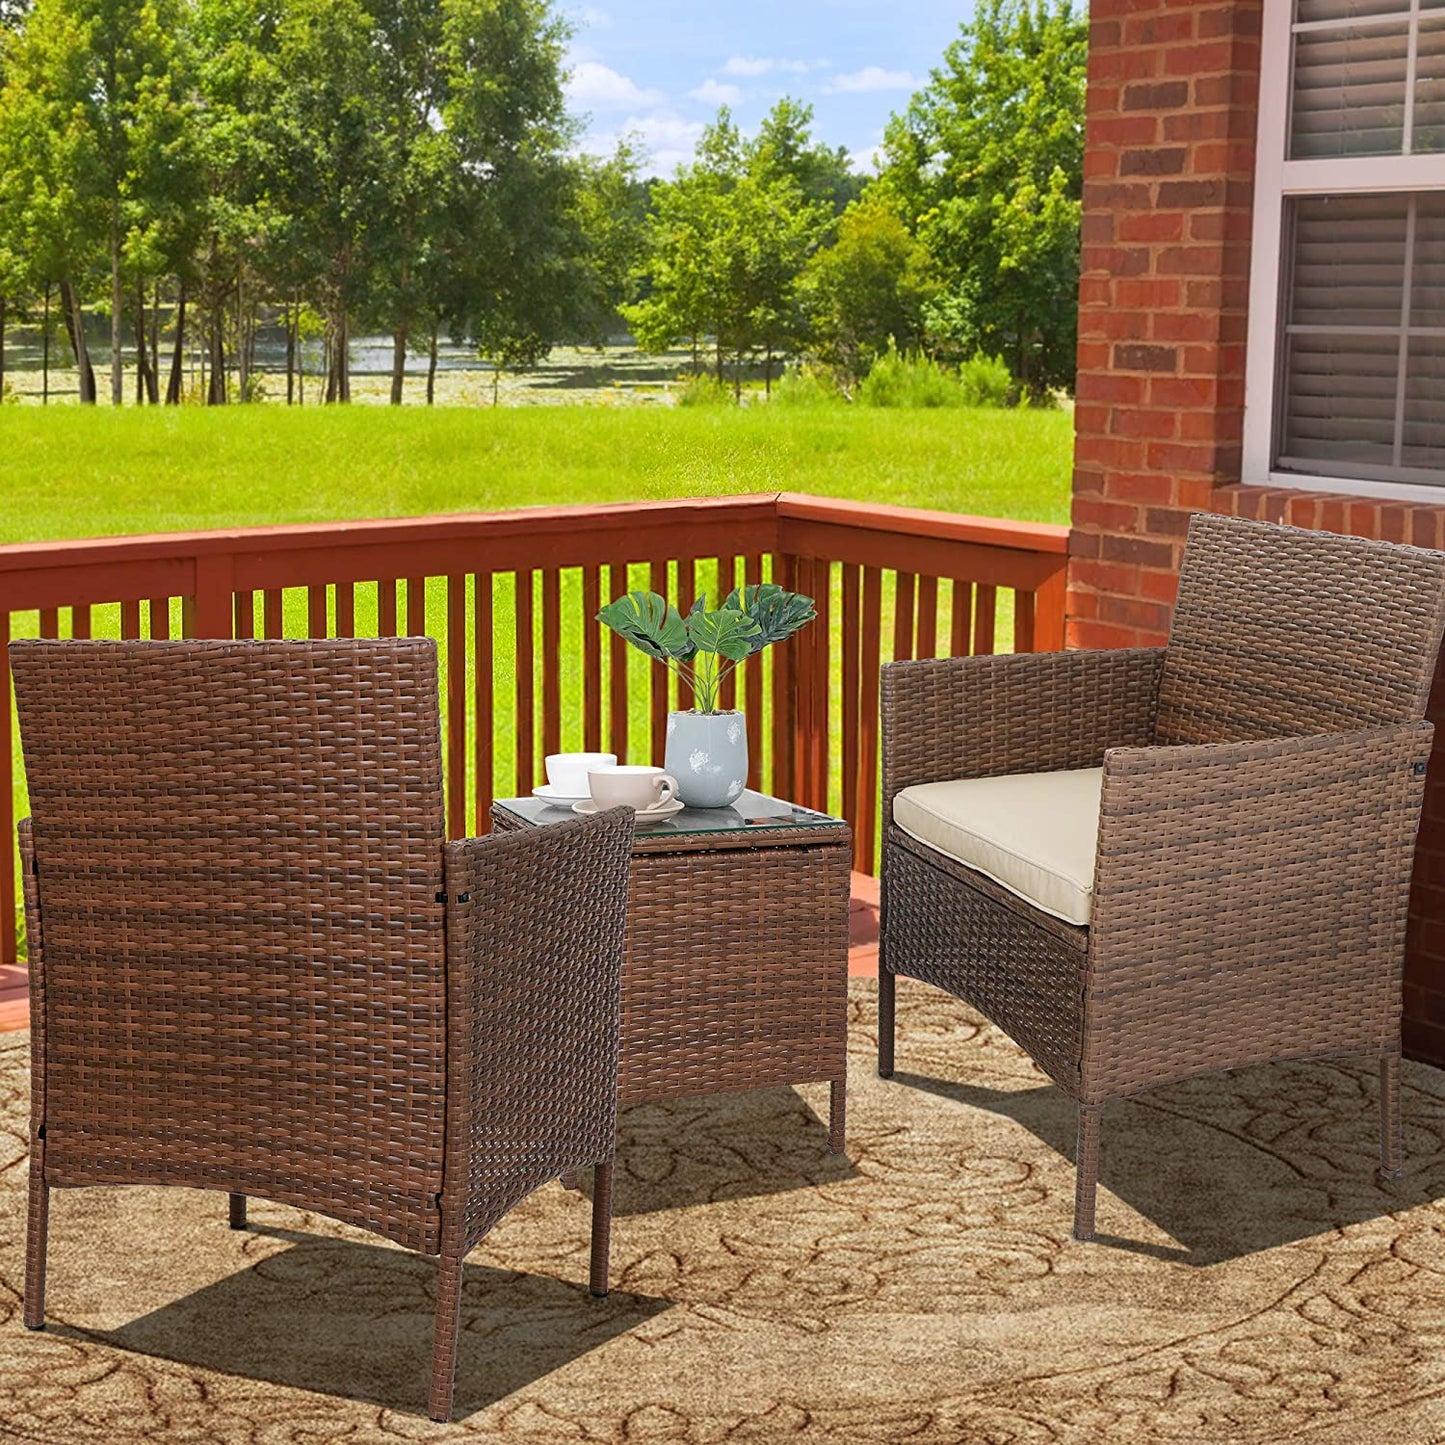 3 Pieces Outdoor Patio Furniture Sets PE Rattan Wicker Chair with Table,Porch Garden Backyard Poolside Balcony Furniture Sets Indoor Outdoor Use